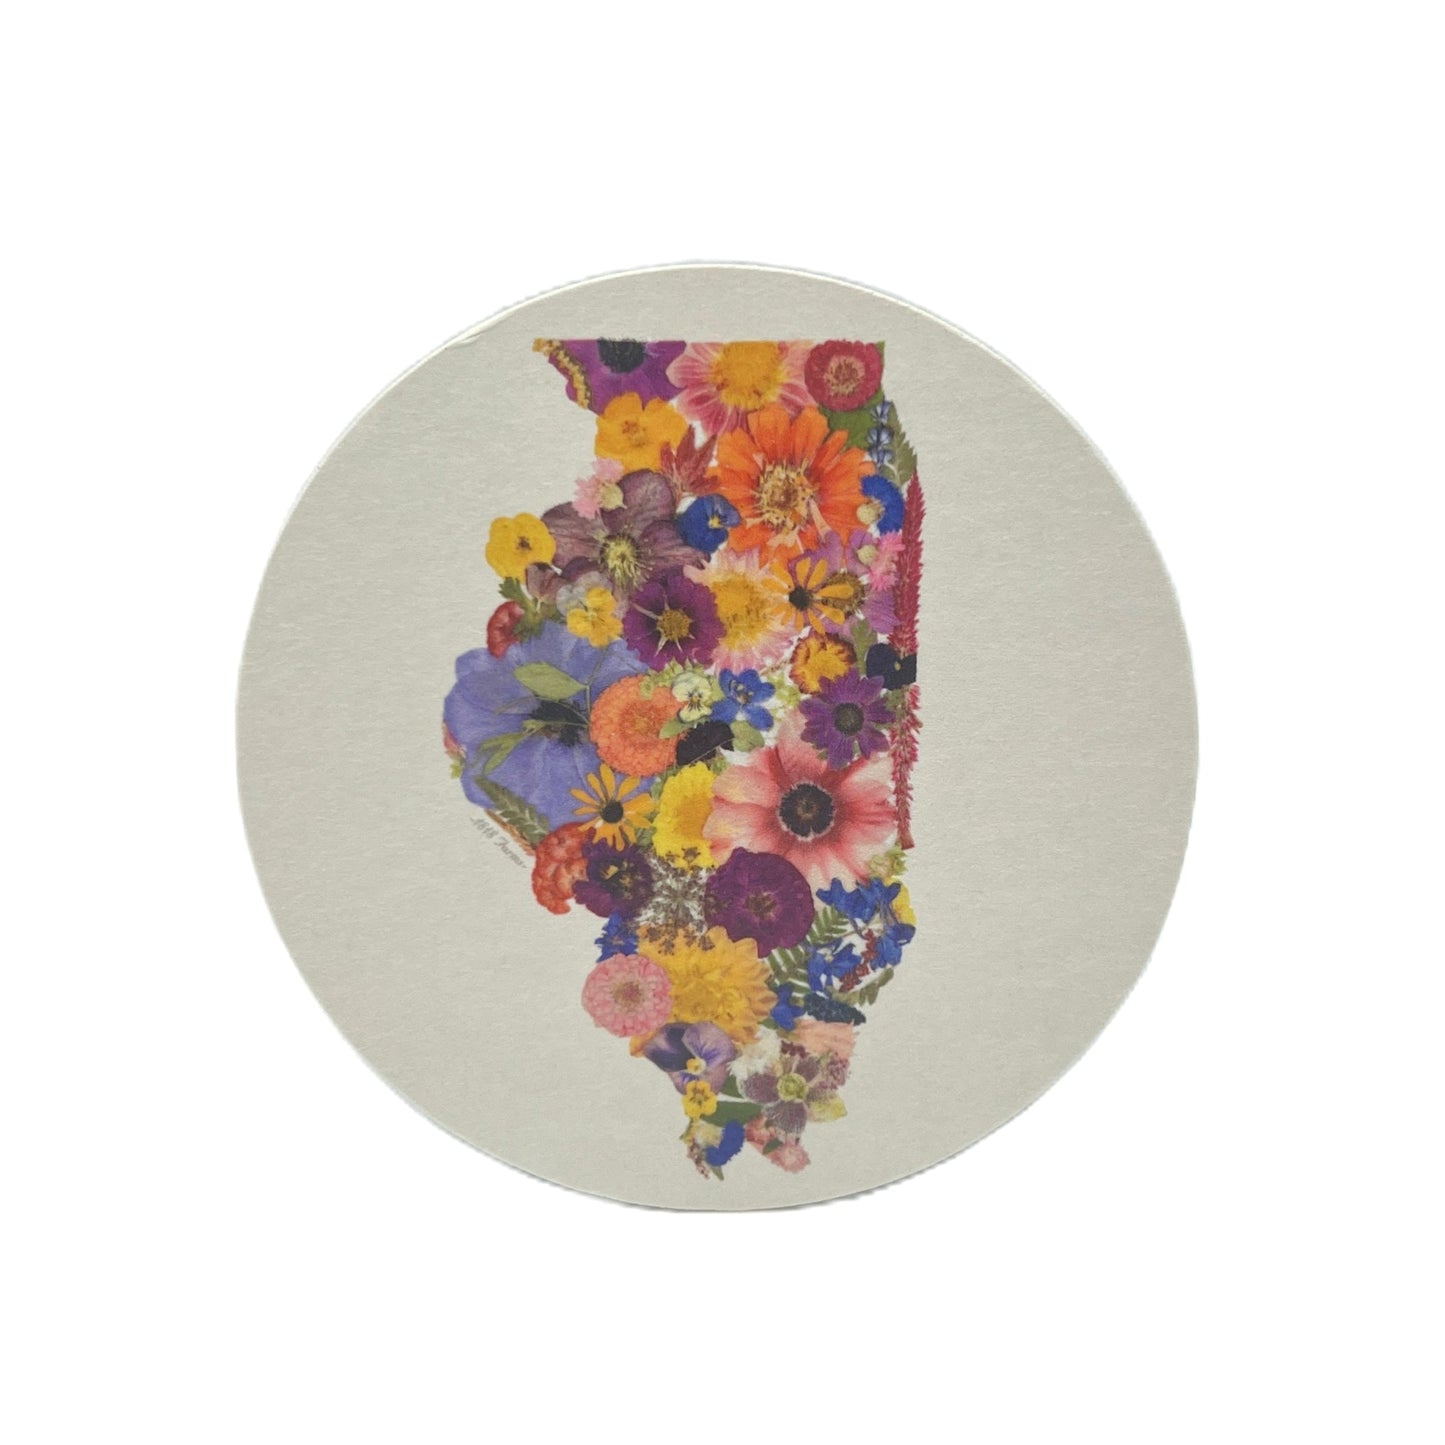 State Themed Drink Coasters (Set of 6)  - "Where I Bloom" Collection Coaster 1818 Farms Illinois  